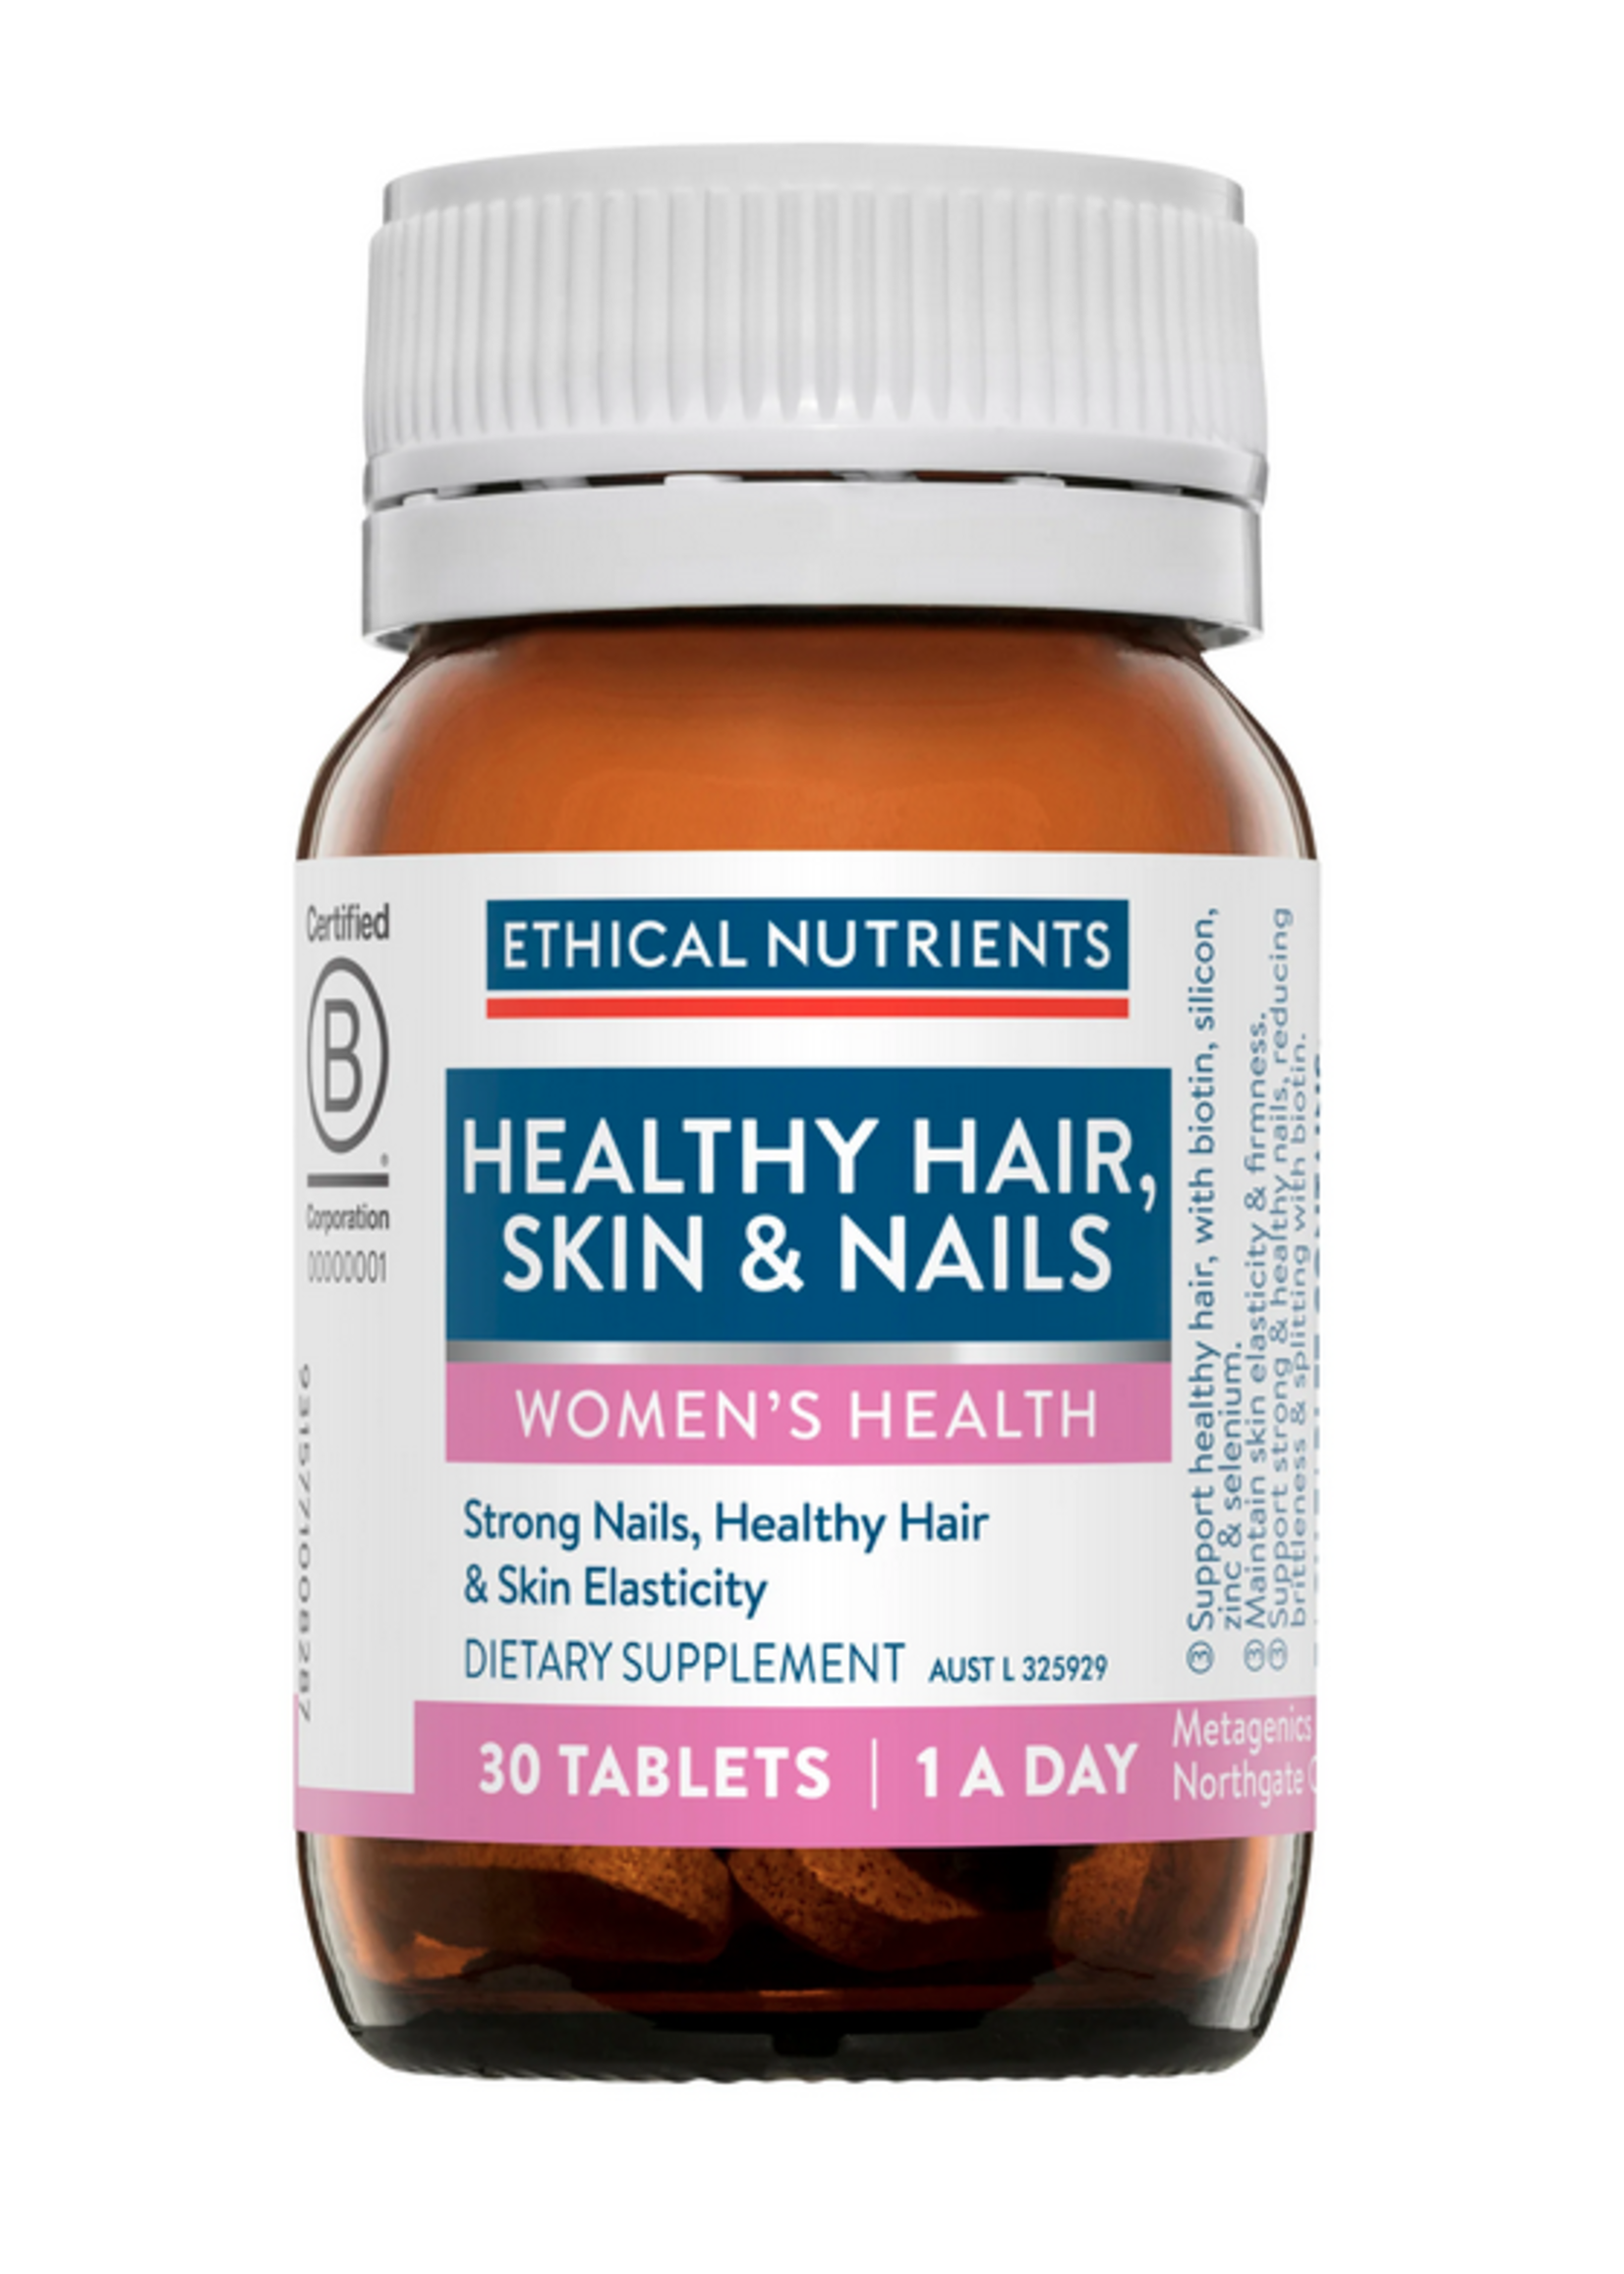 ETHICAL NUTRIENTS Ethical Nutrients Healthy Hair, Skin & Nails 30 tabs